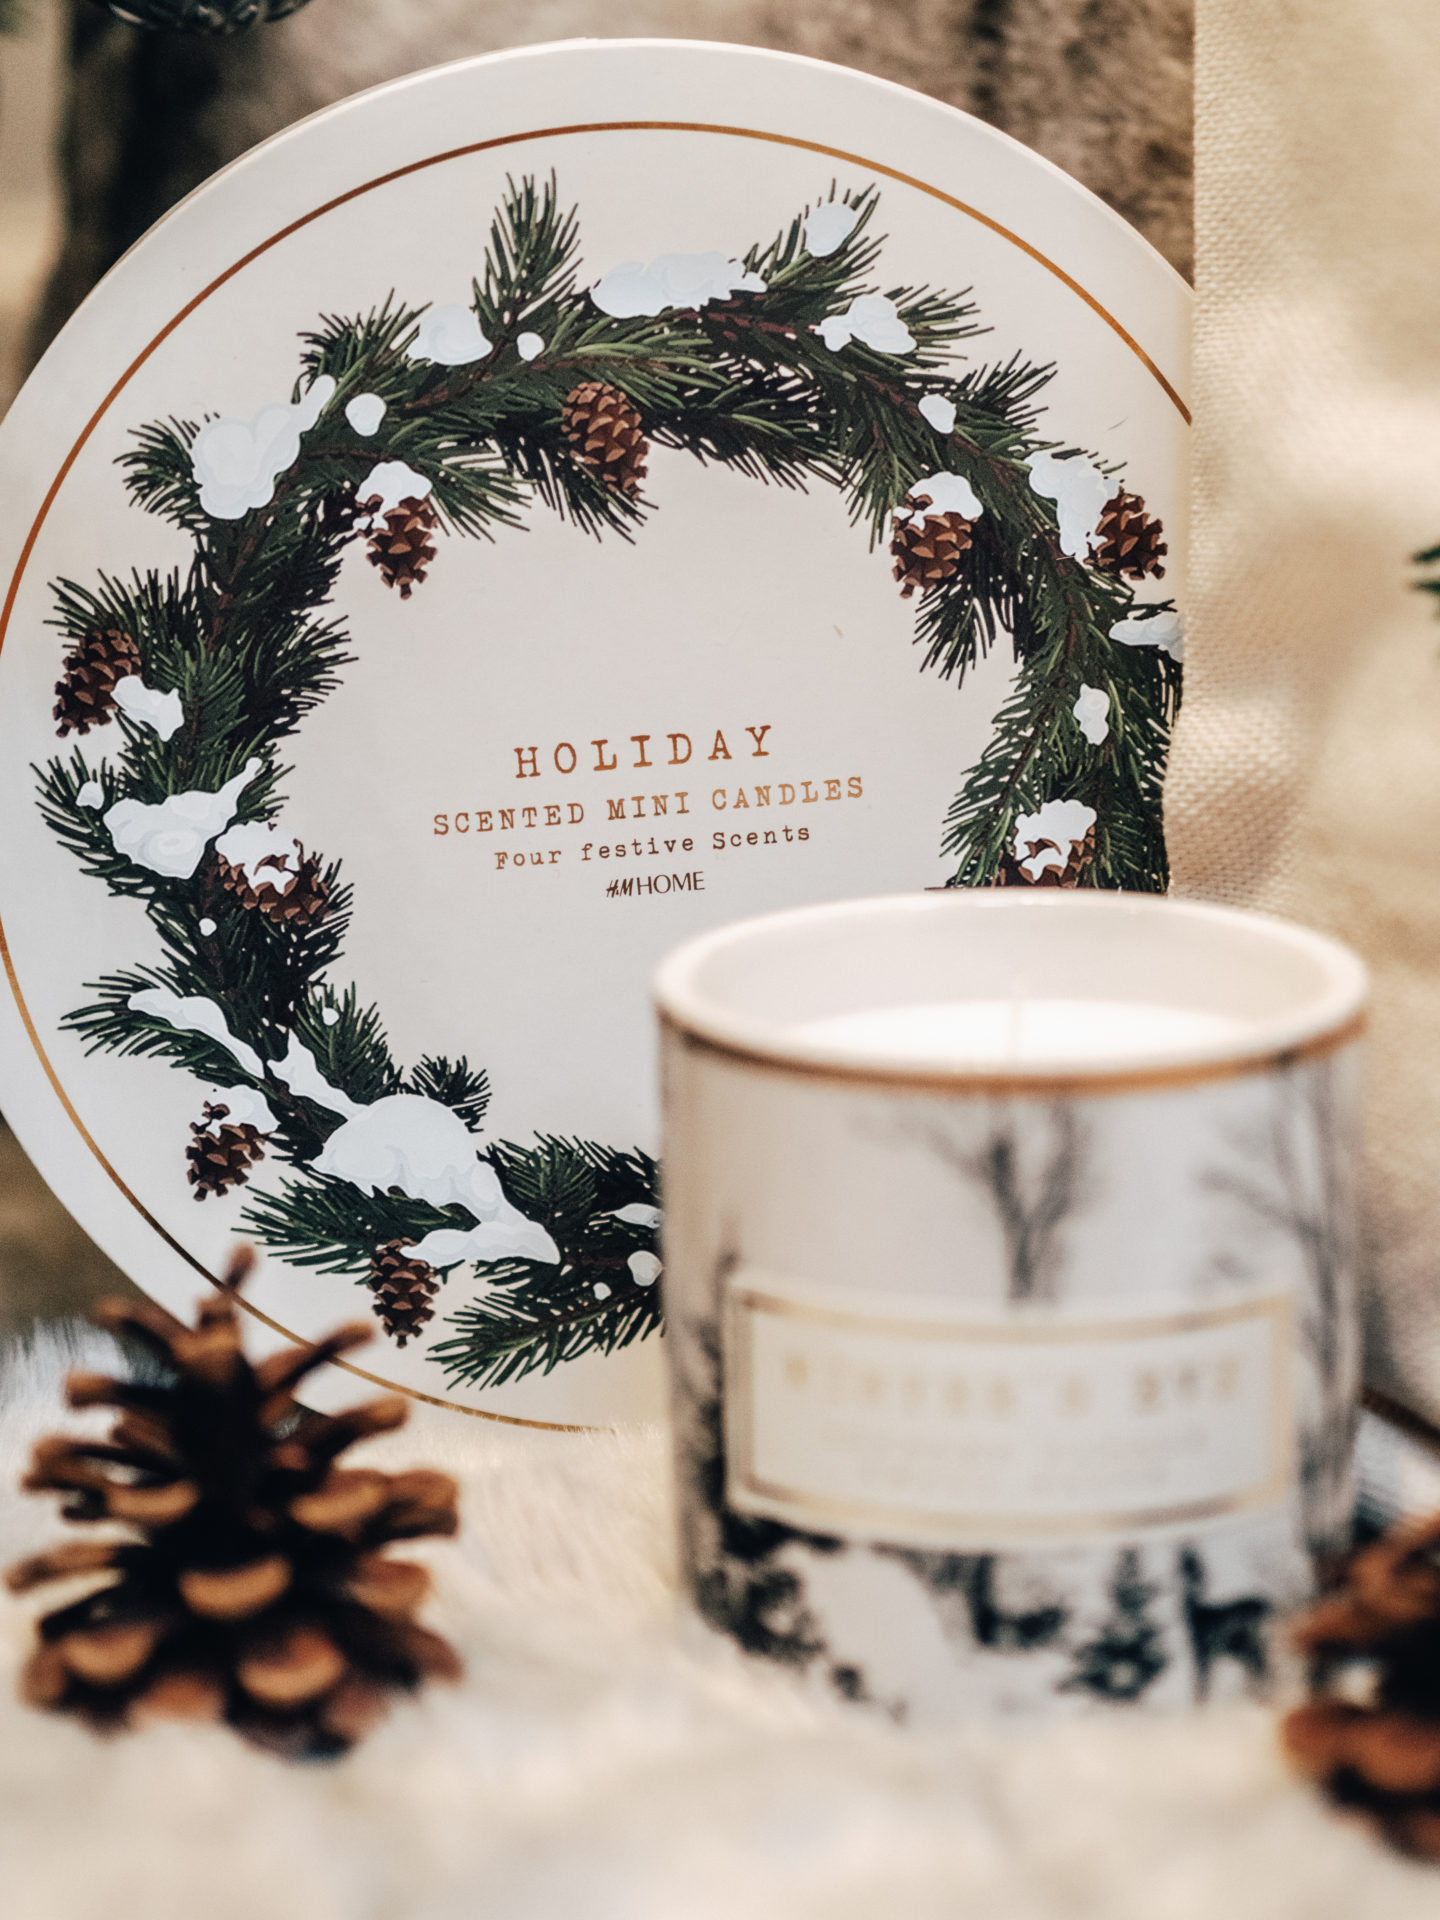 Festive scented candles for the holiday season